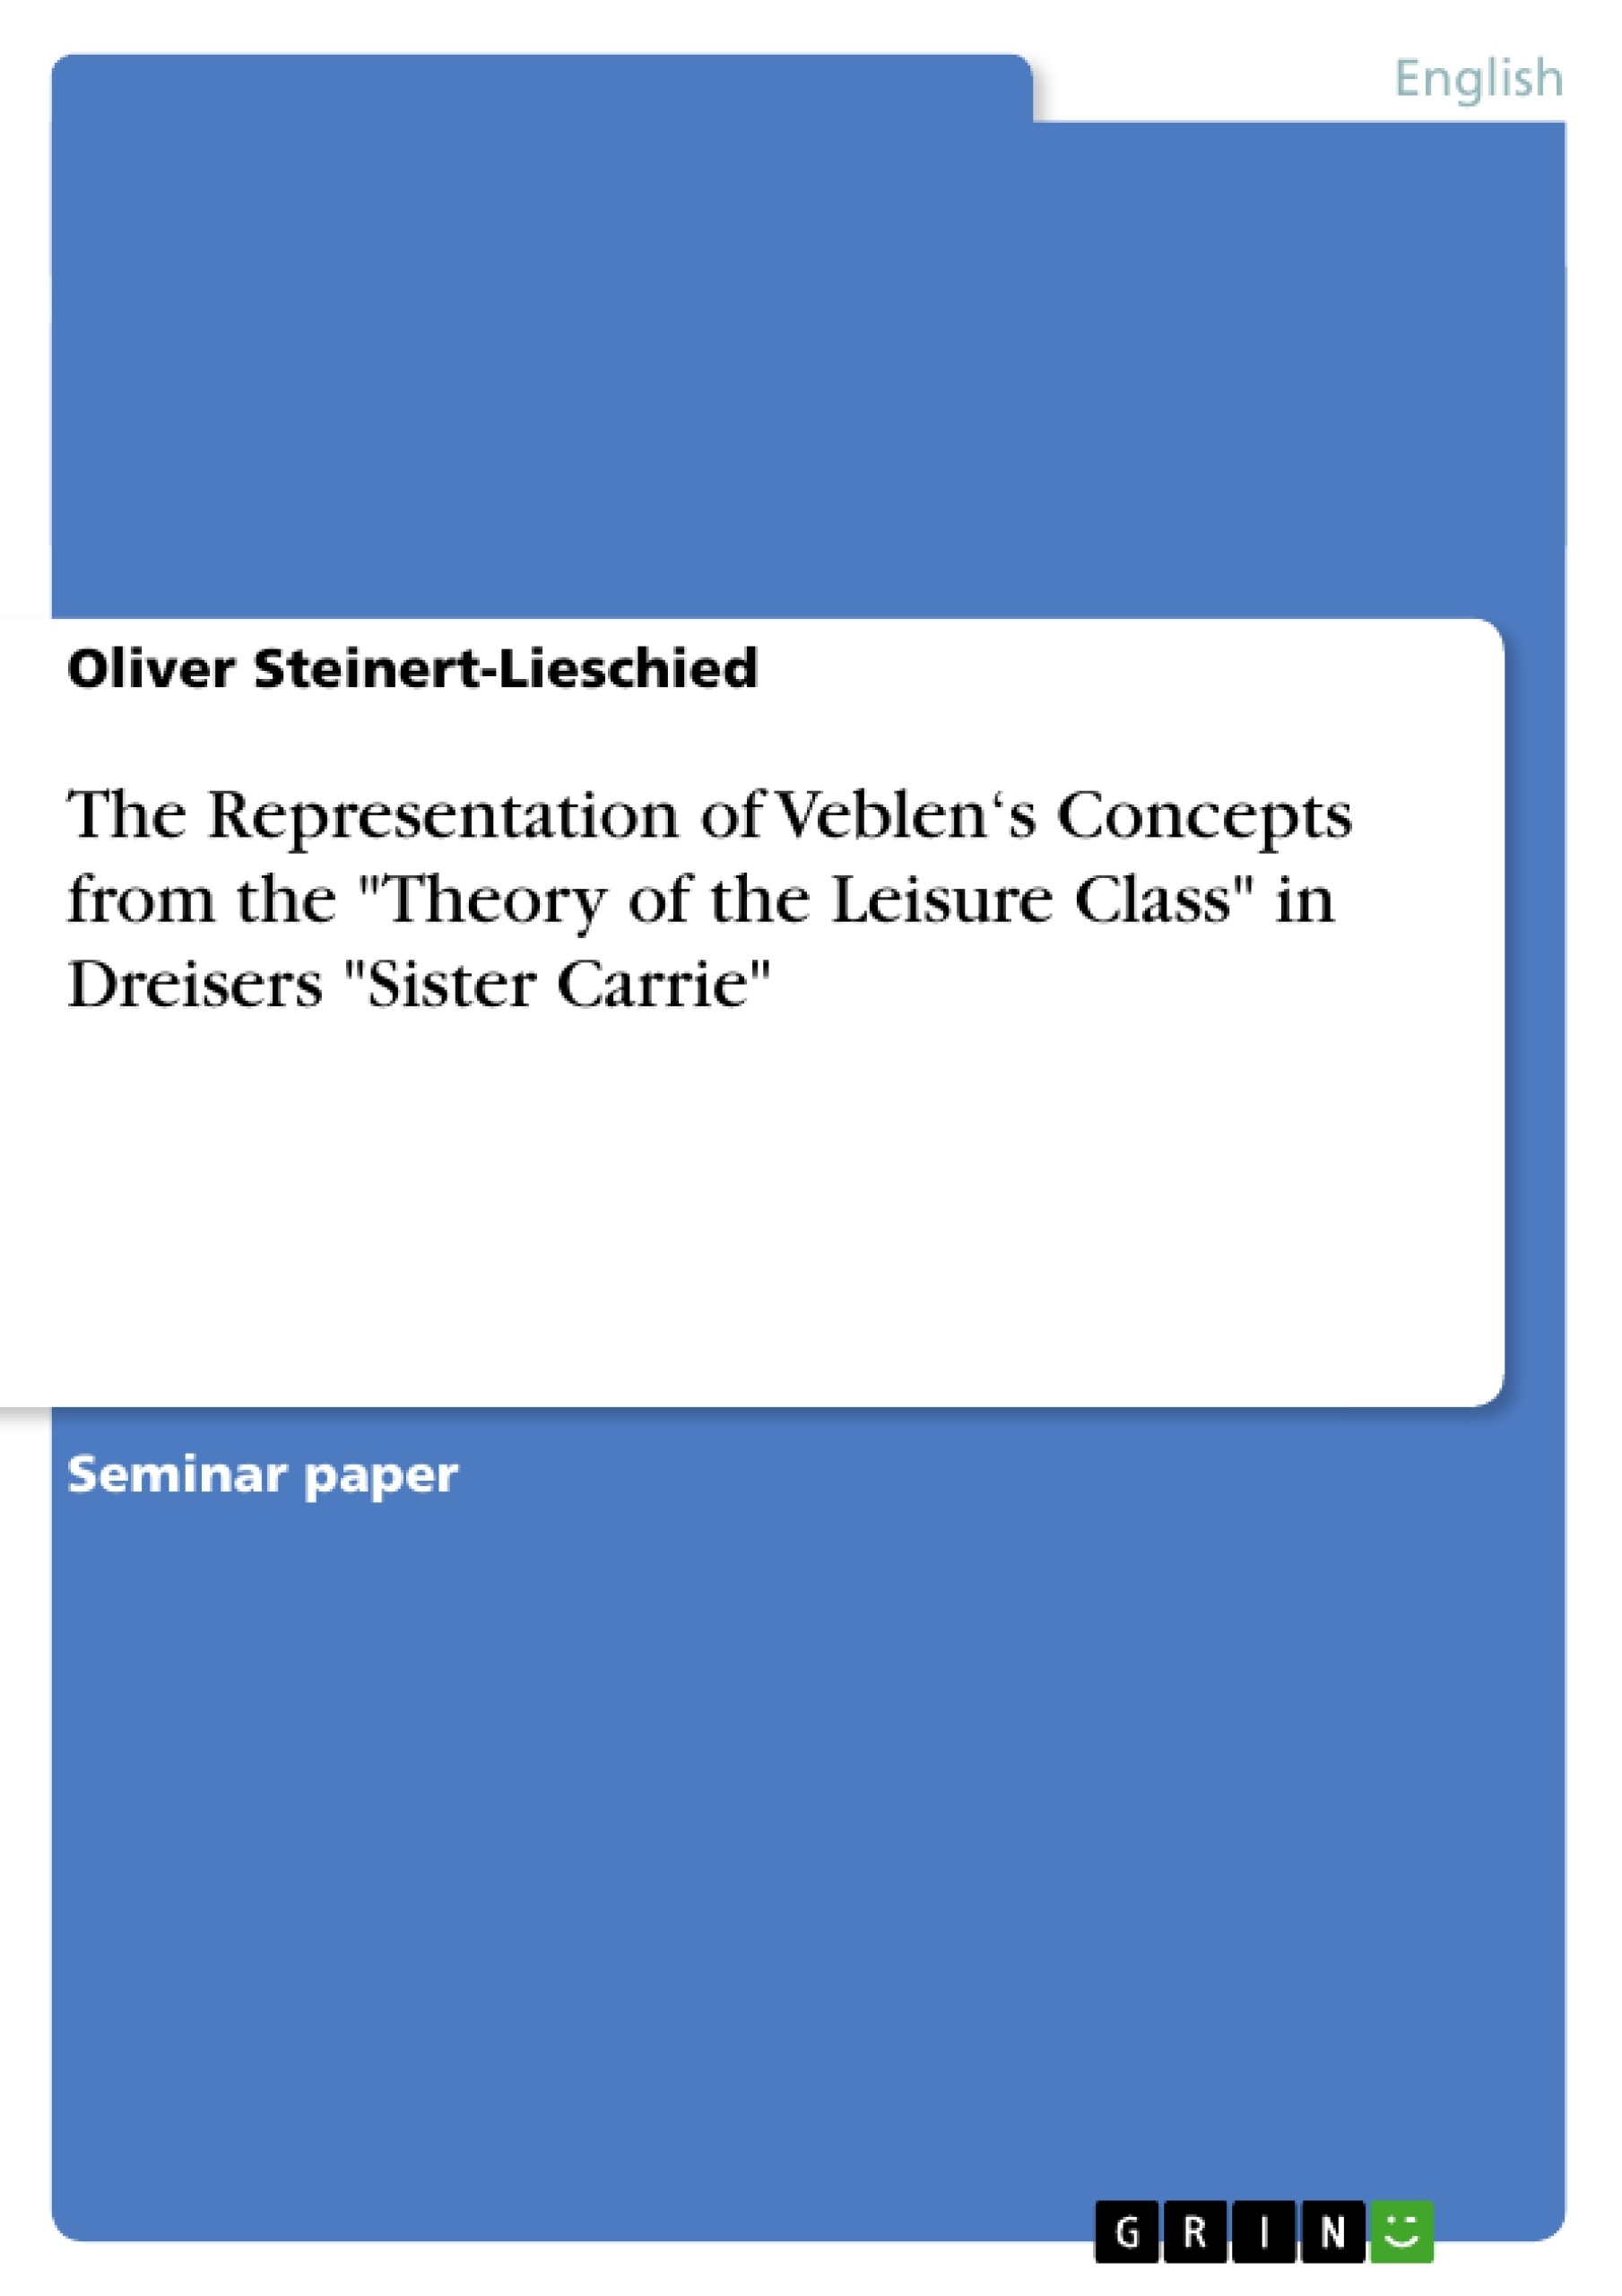 Título: The Representation of Veblen‘s Concepts from the "Theory of the Leisure Class" in Dreisers "Sister Carrie"